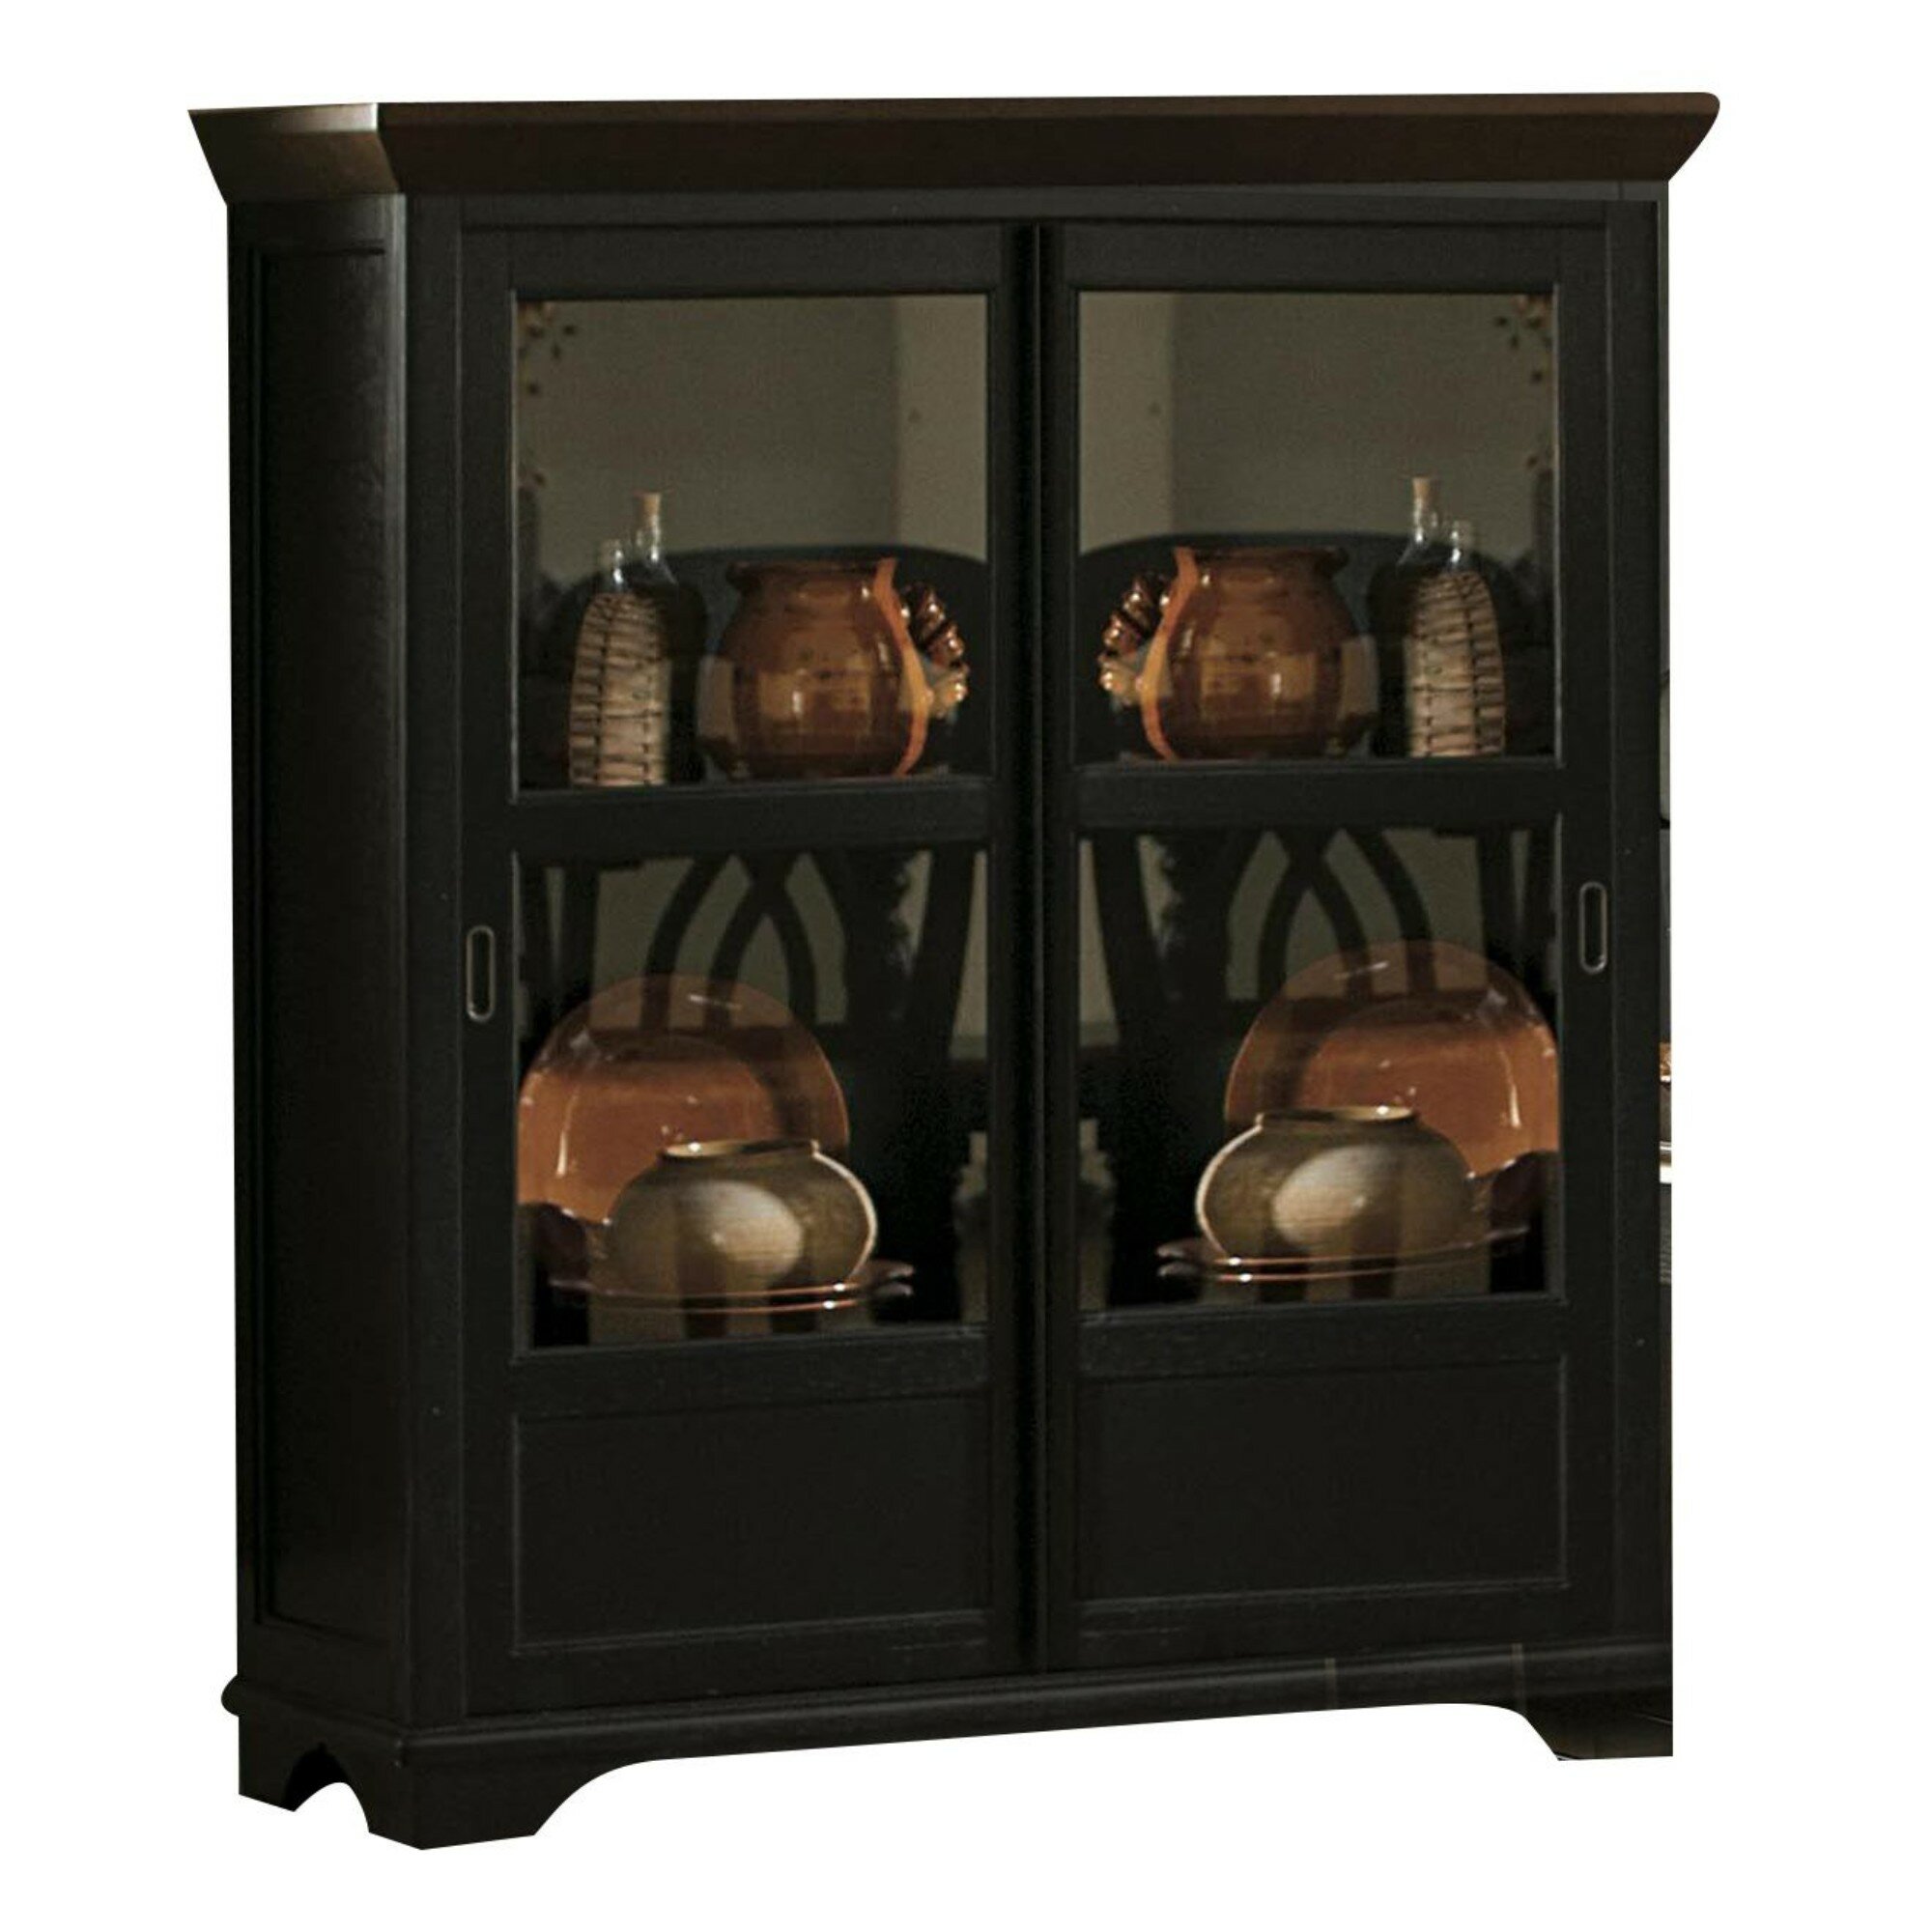 Darby Home Co Beaudin Wooden Corner Curio Cabinet Wayfair